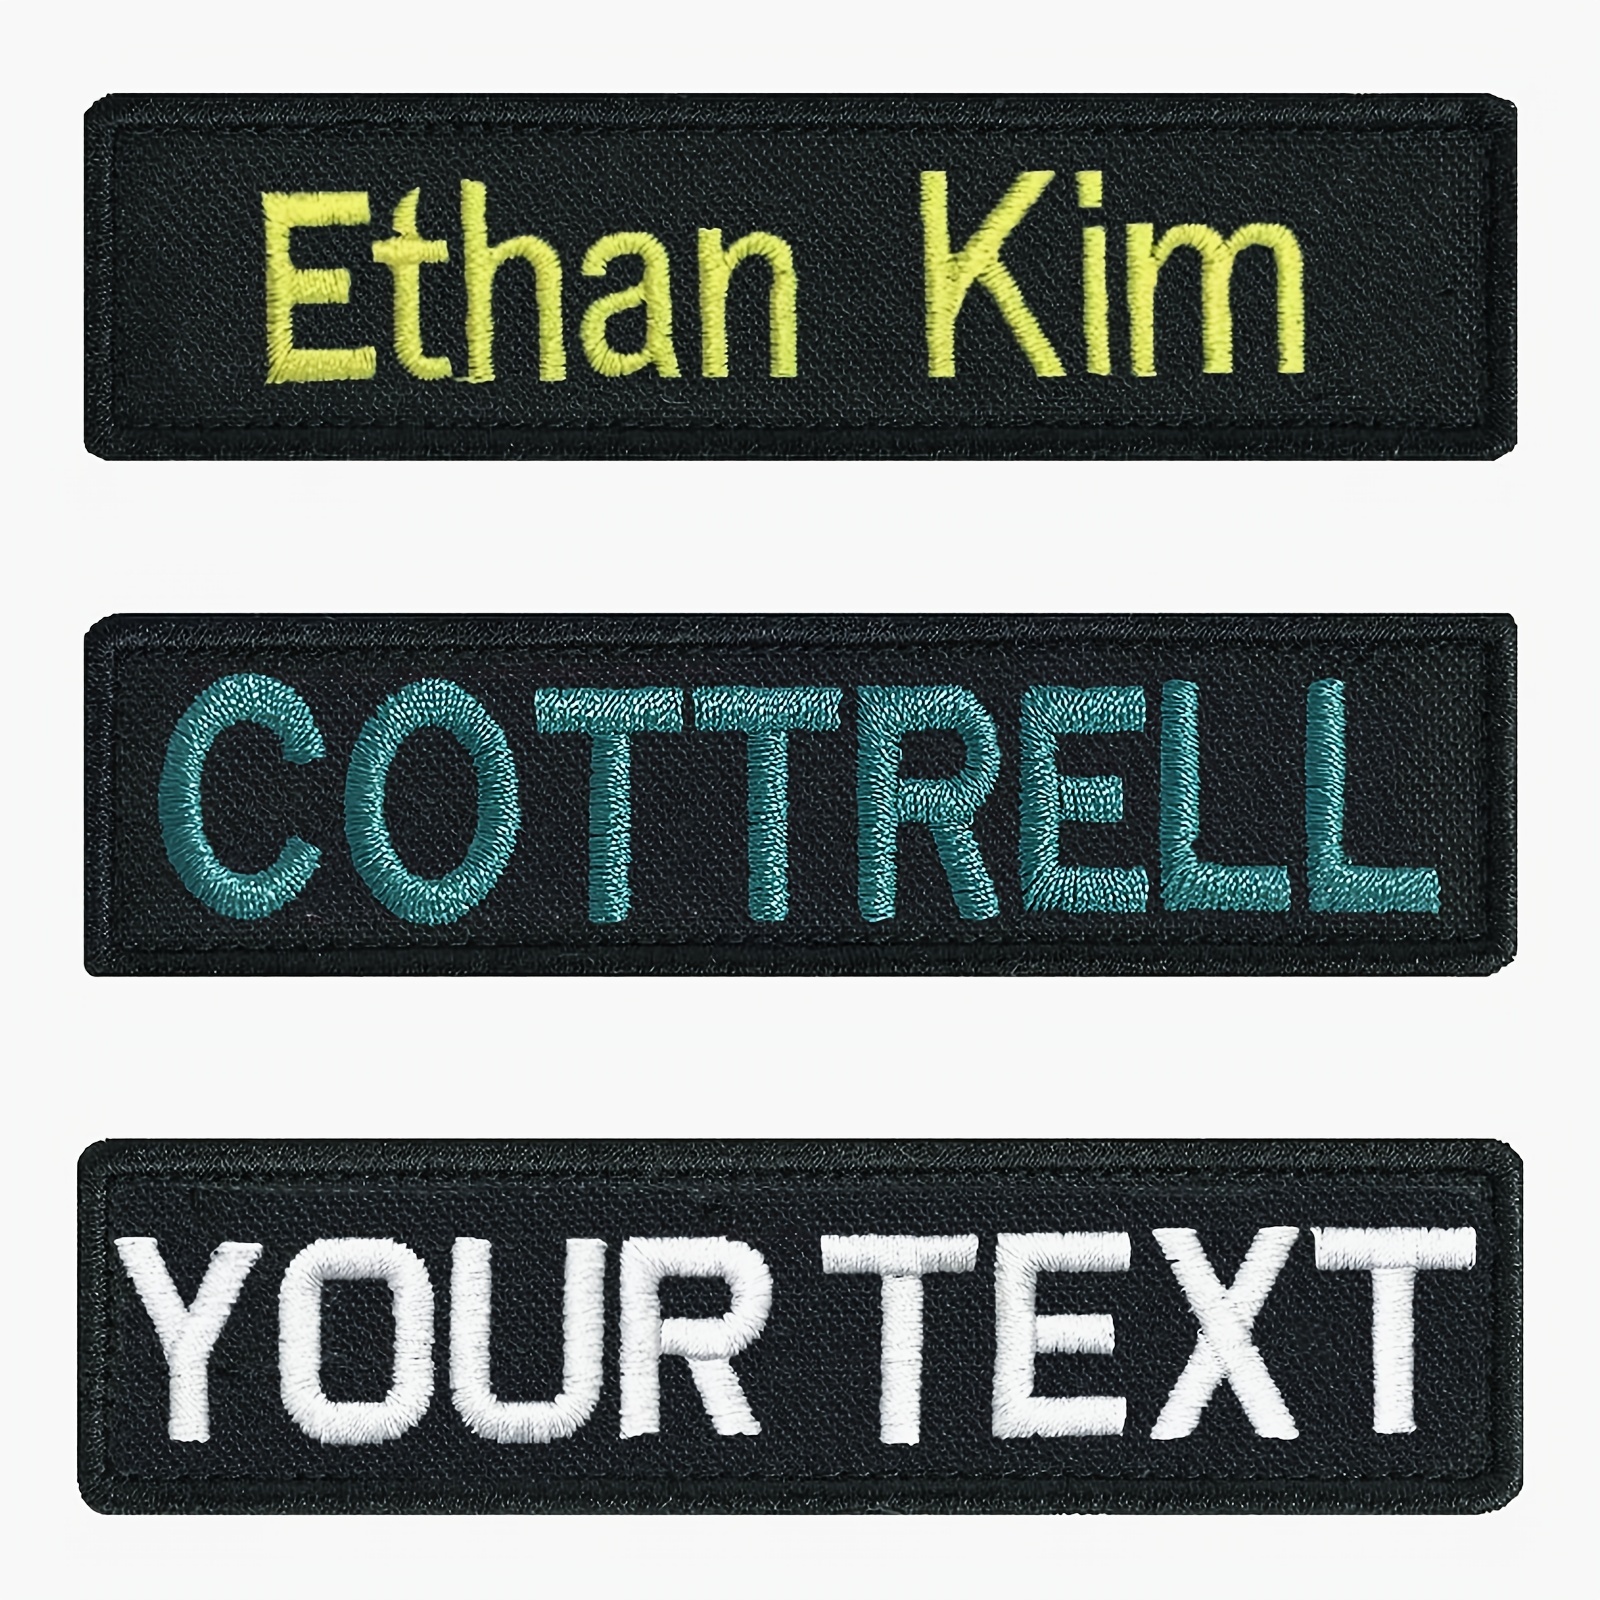  Custom Name Patches, 2pcs Personalized Embroidered Name Tag for  Jackets Backpacks Dog Harness Patches/4x1 (Black) : Arts, Crafts & Sewing